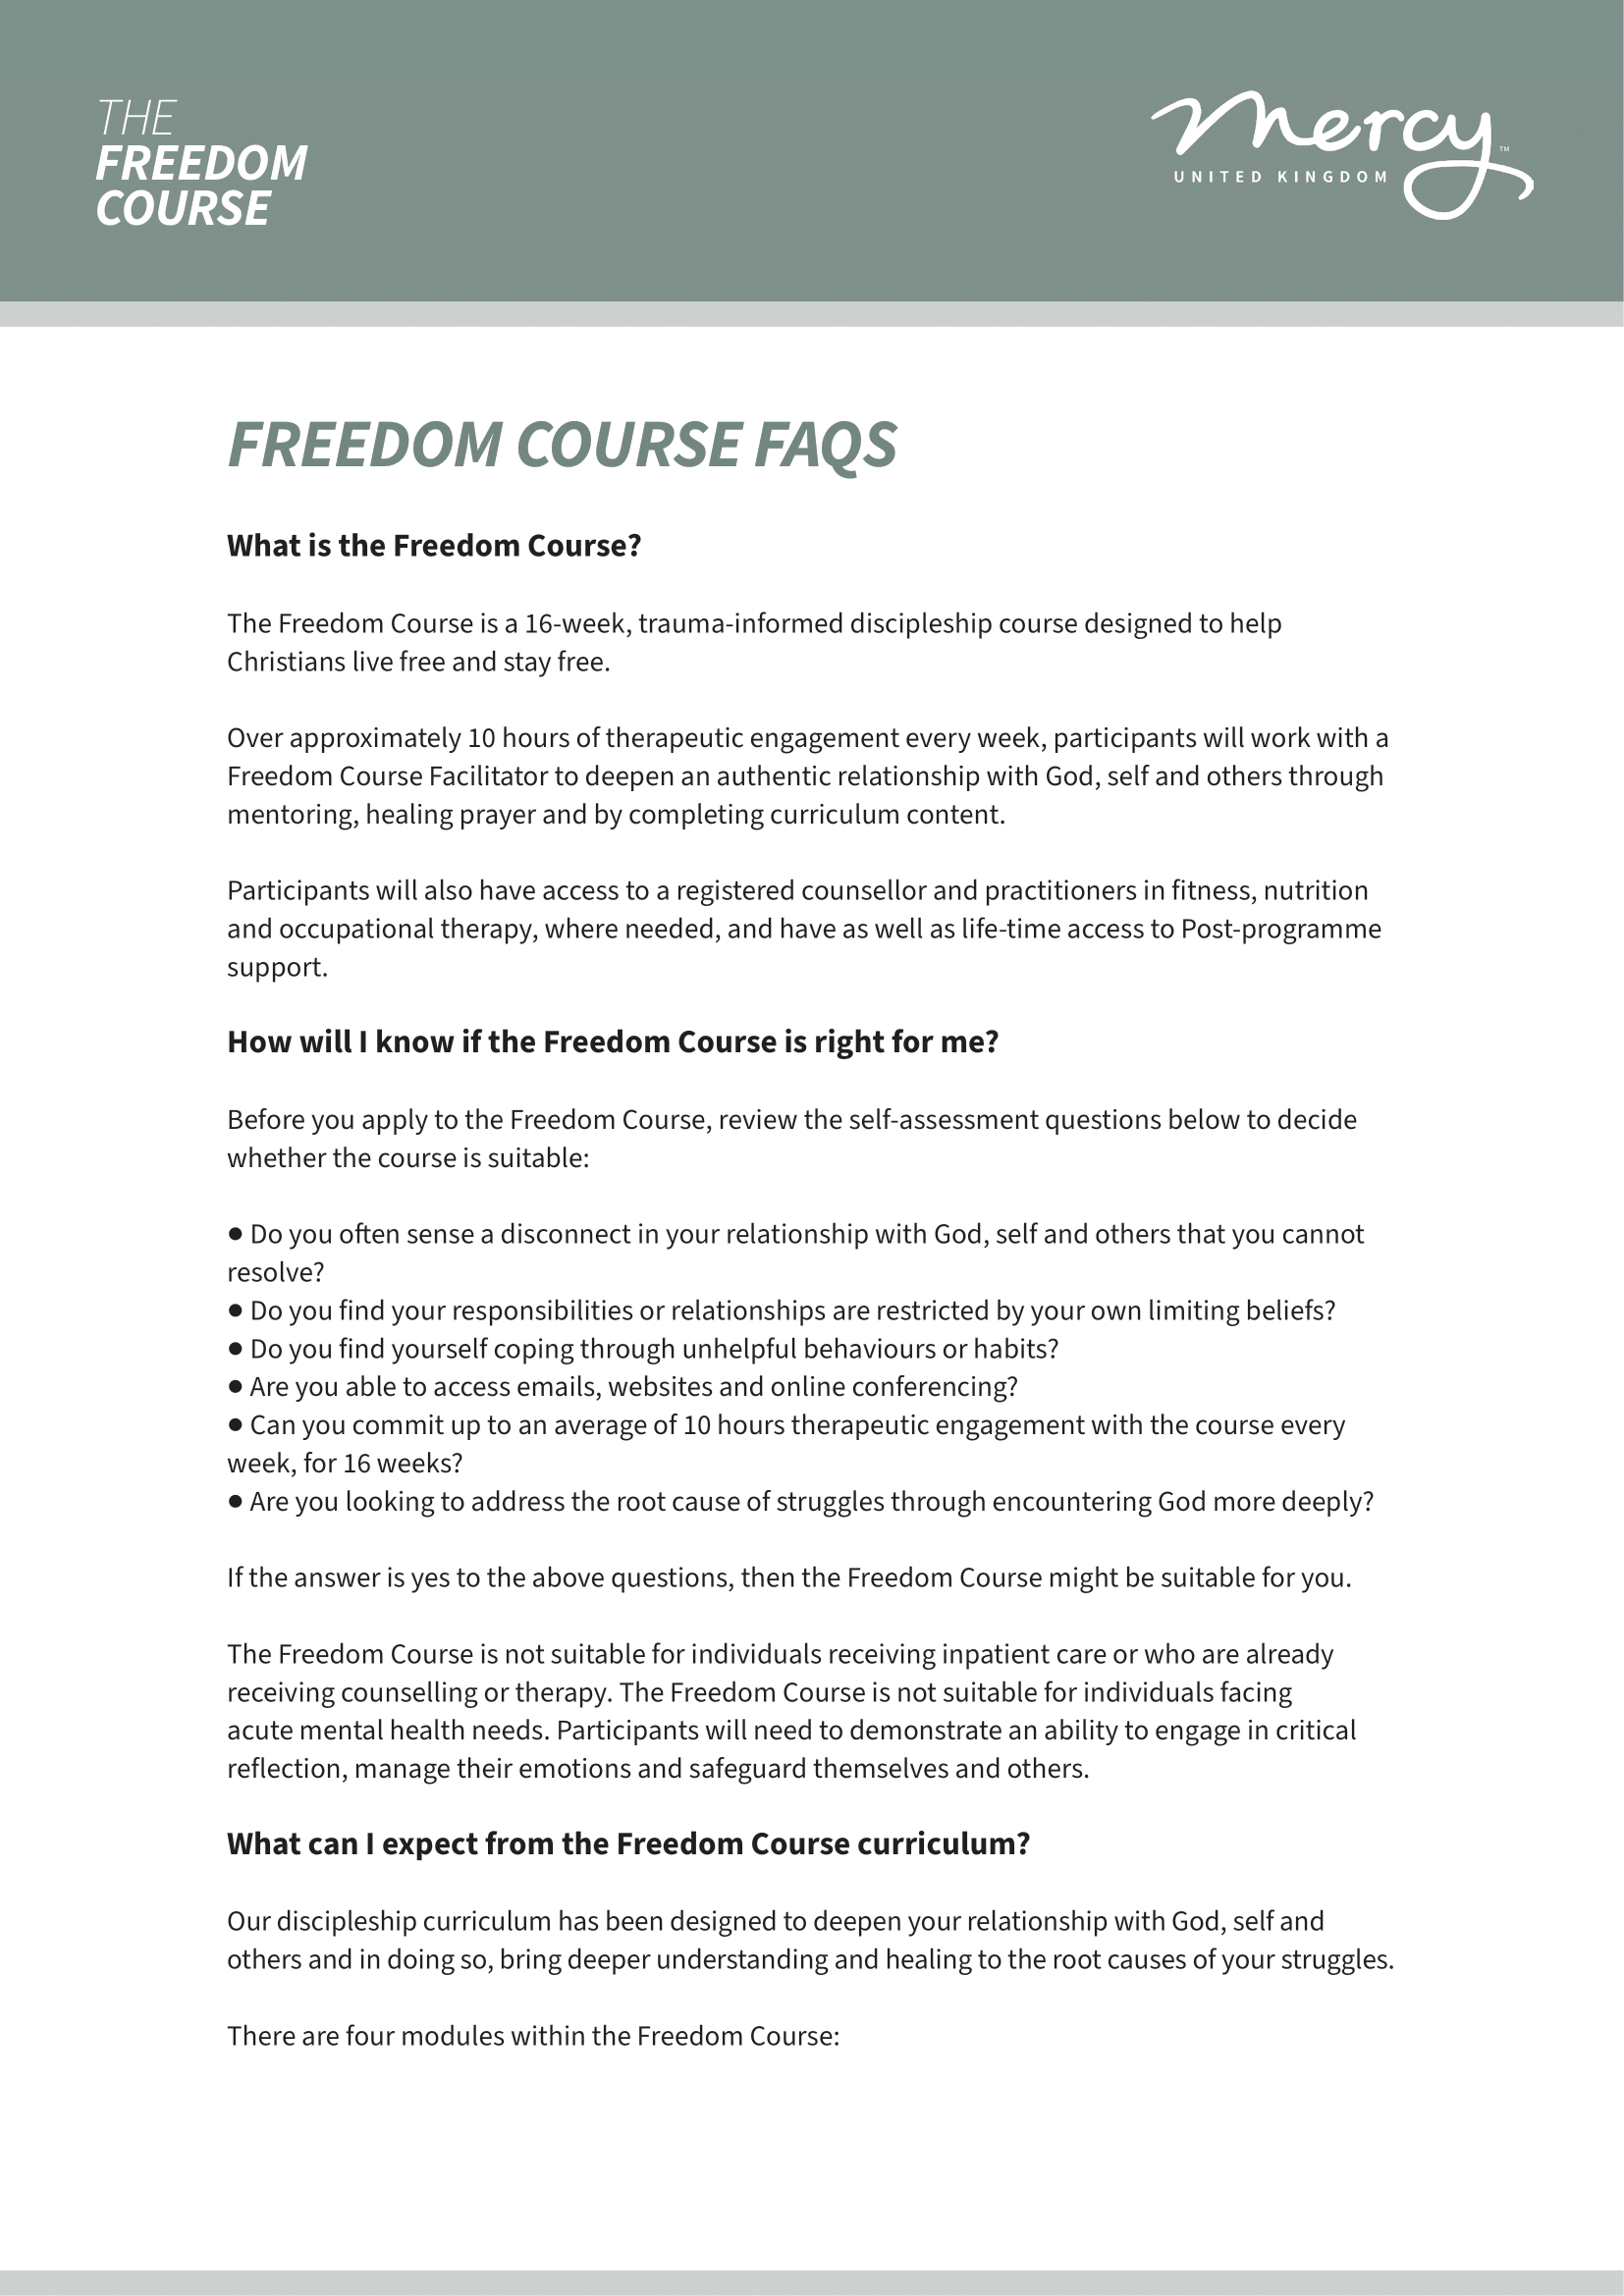 Freedom Course FAQs-1.png